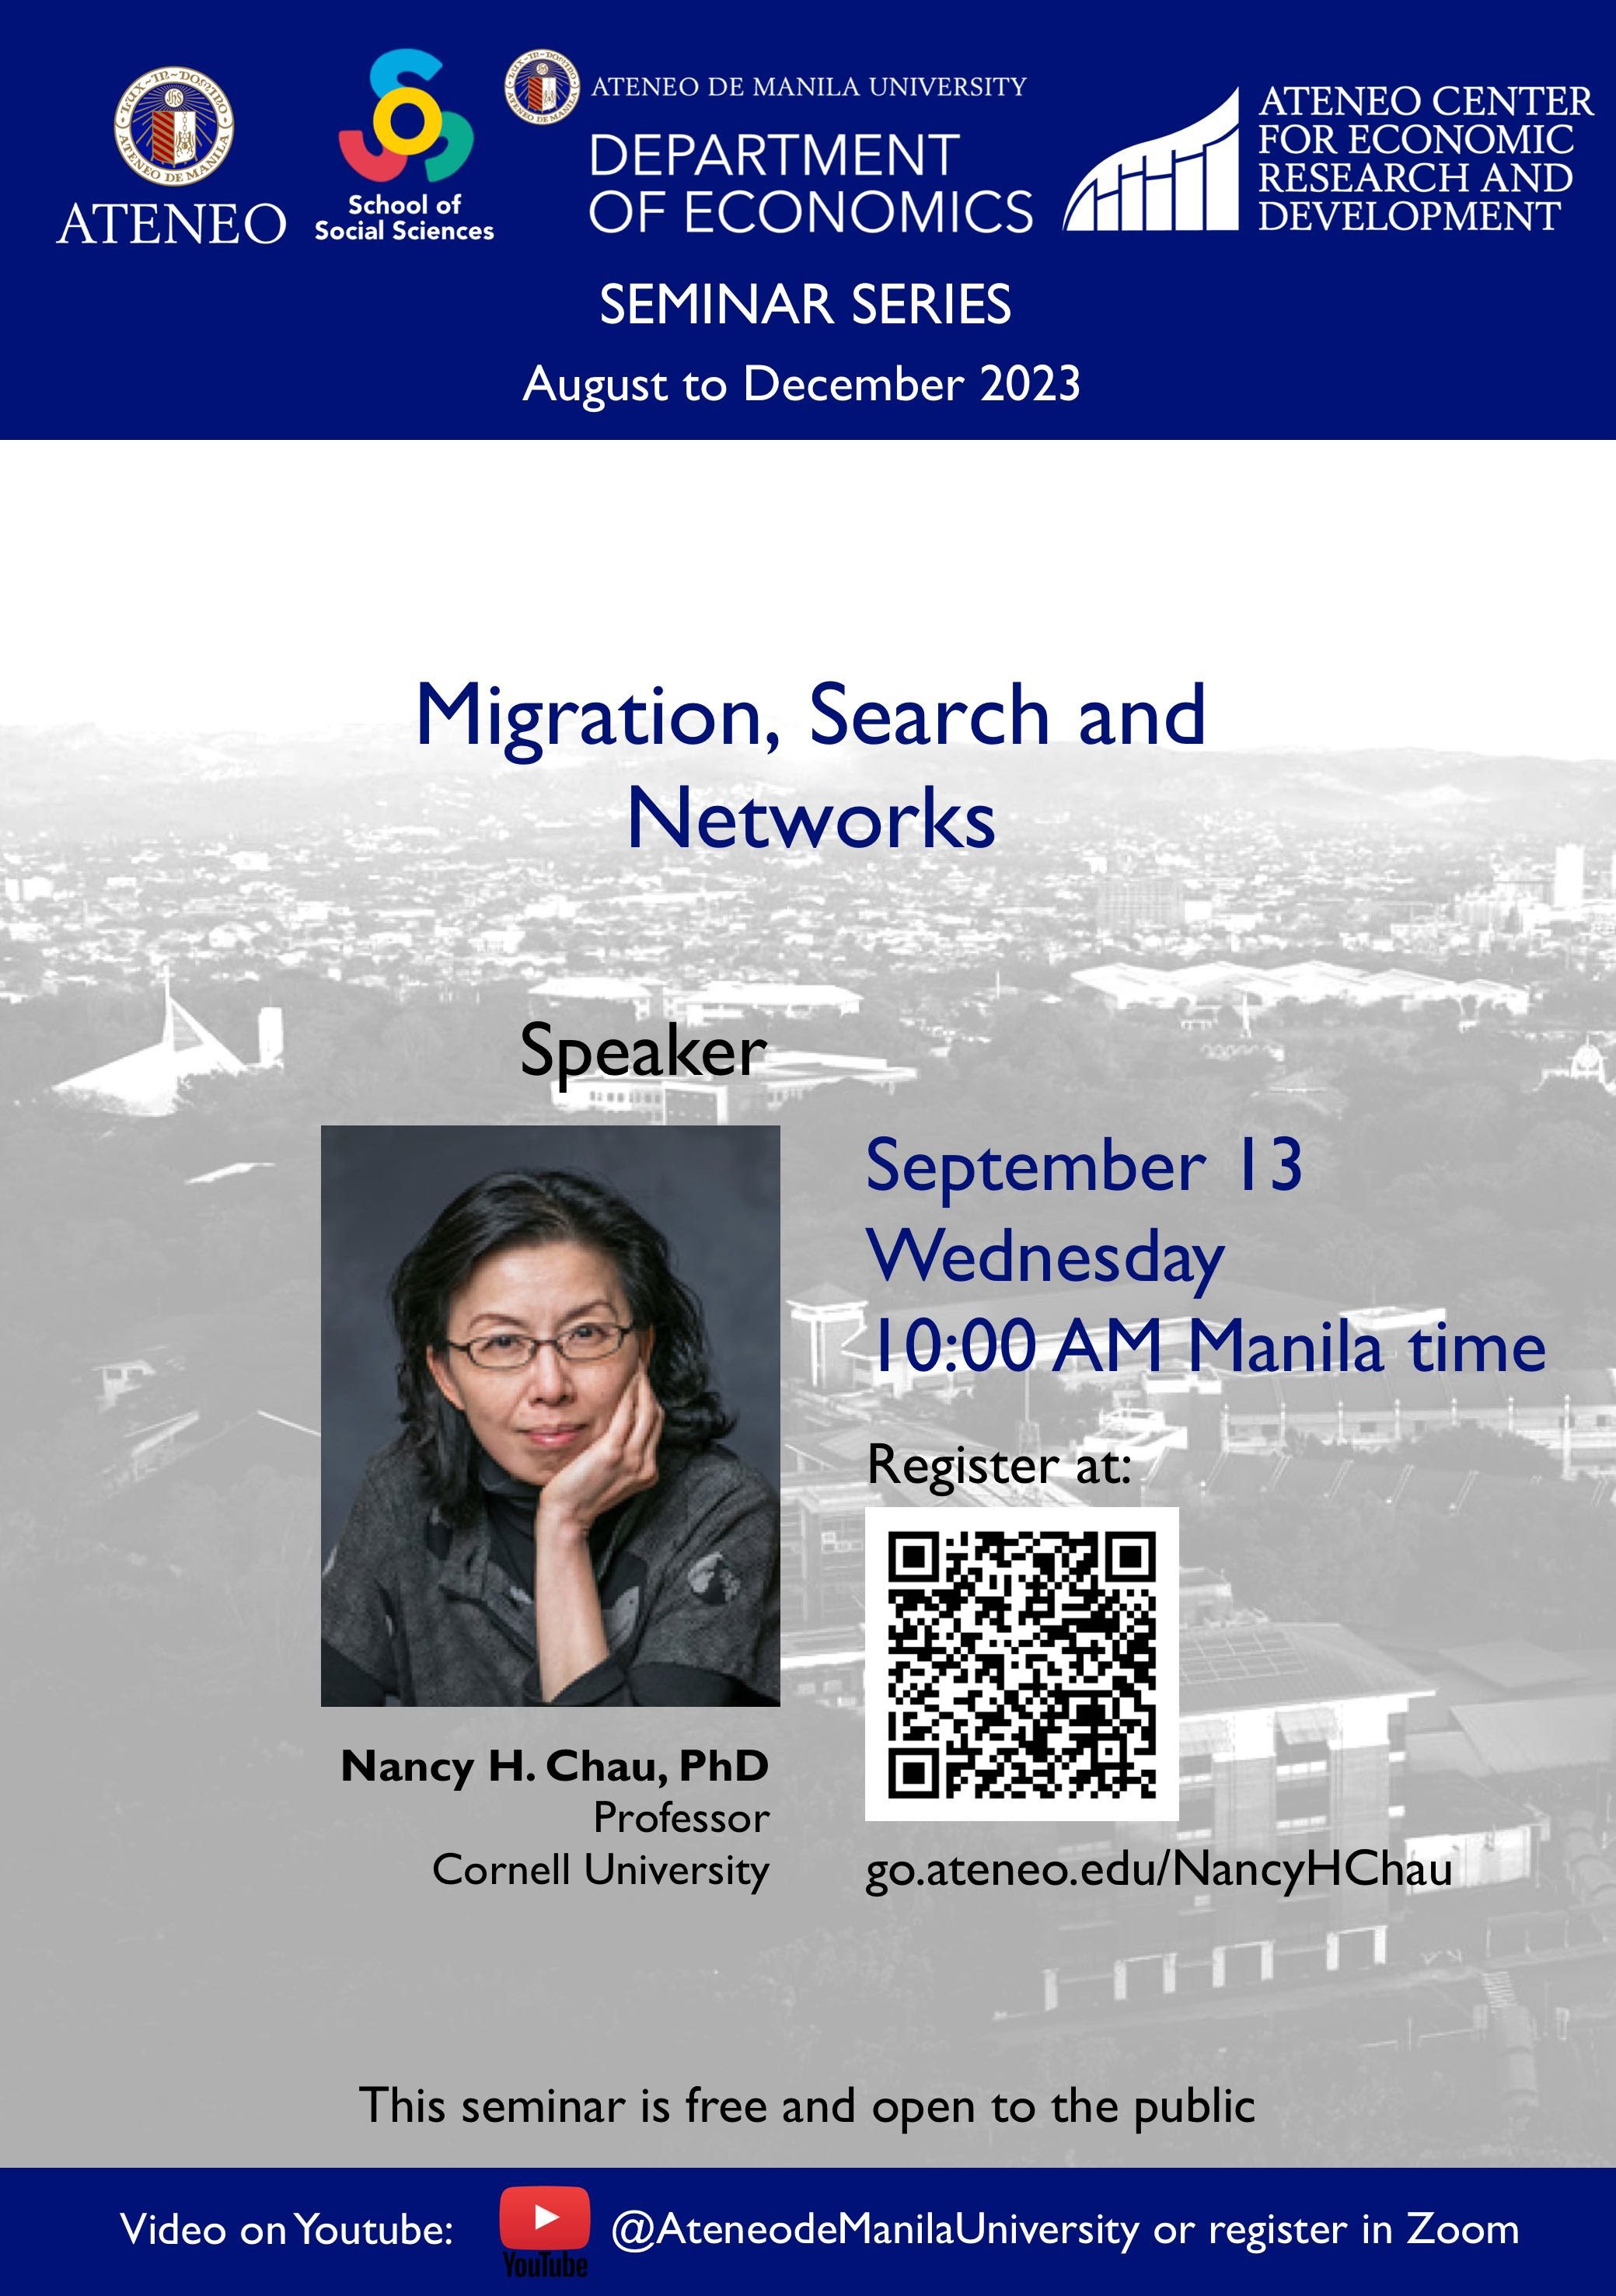 Migration, Search and Networks